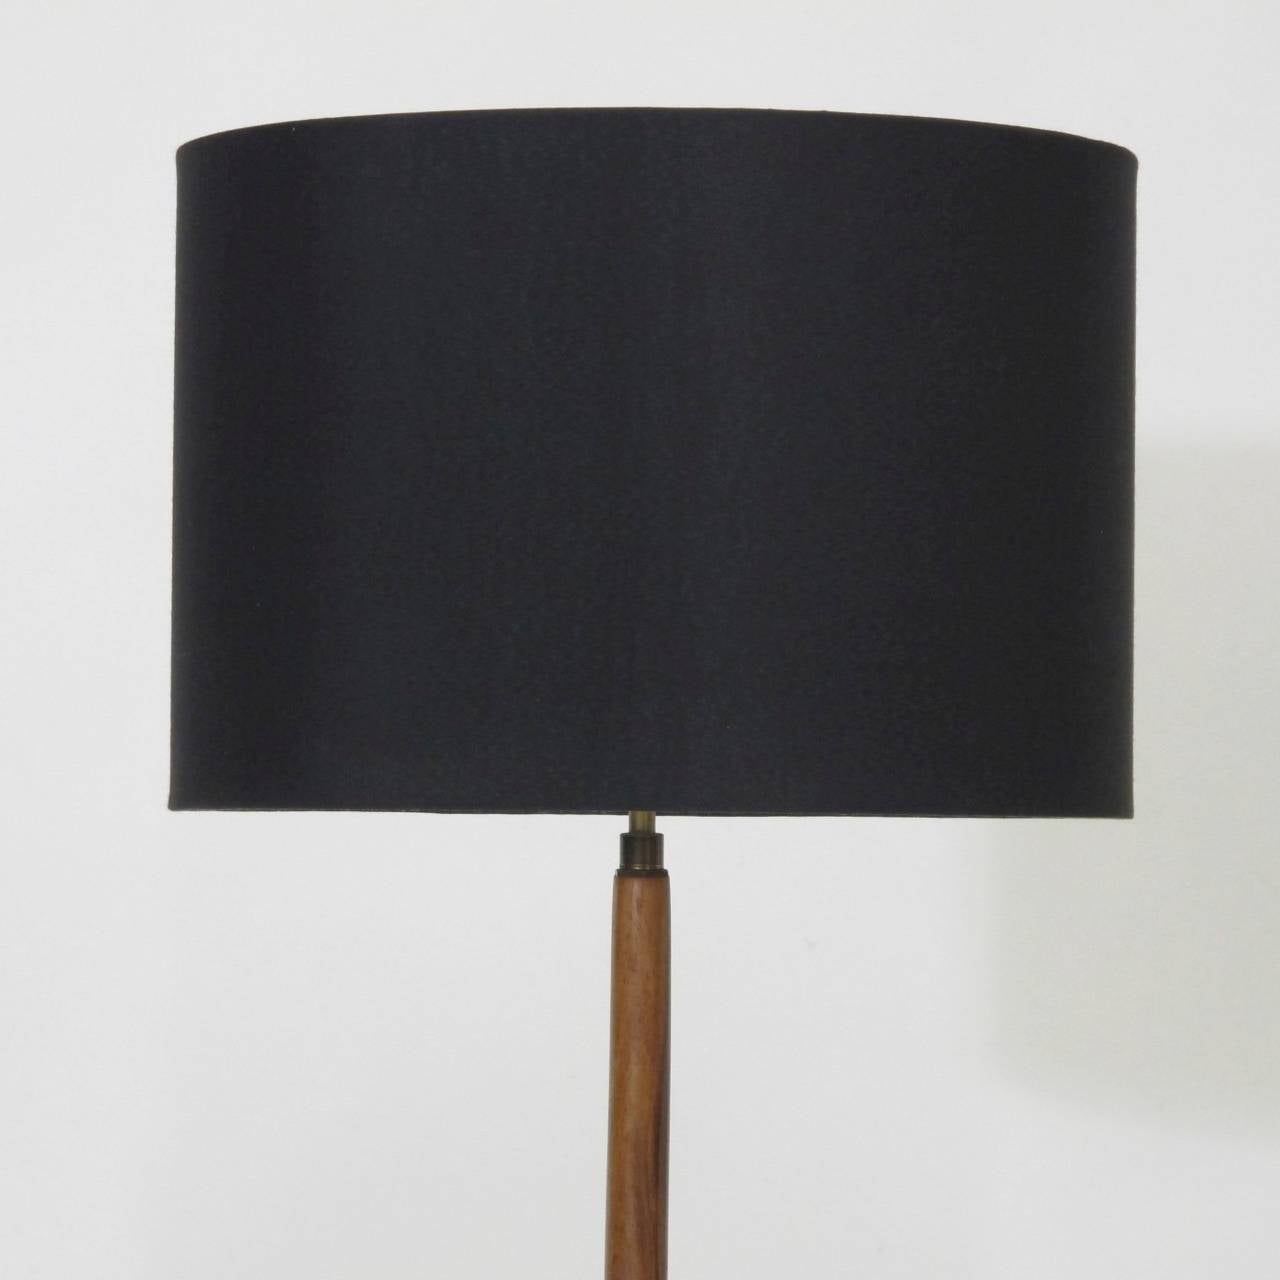 Danish floor lamp with turned Brazilian Rosewood stem with brass inlay on round base, newly rewired with black silk cord. Shown with black silk shade.
Base diameter 9.75.